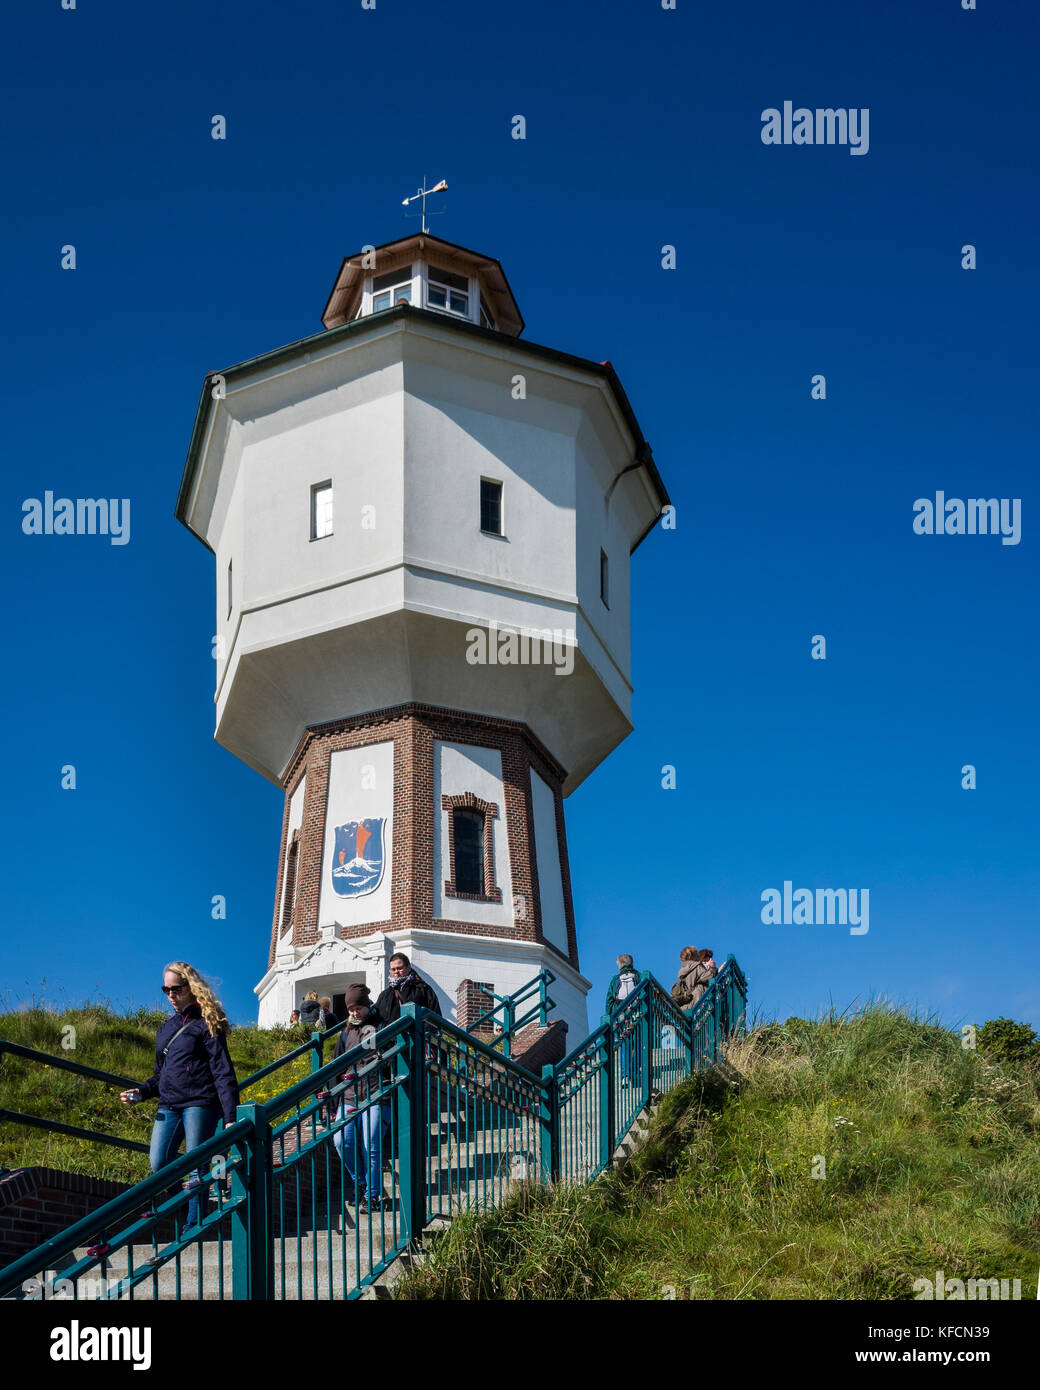 Wasserturm Langeoog. Germany Deutschland.  Holiday makers walking down the steps as the leave the water tower, which is one of Langeoog's main tourist attractions.  It's a sunny day making a nice blue sky to contrast the white of the water tower.  Previous visitors have left padlocks locked to the railings, which can be seen in the foreground.  Photographed with a Ricoh GRII camera. Stock Photo